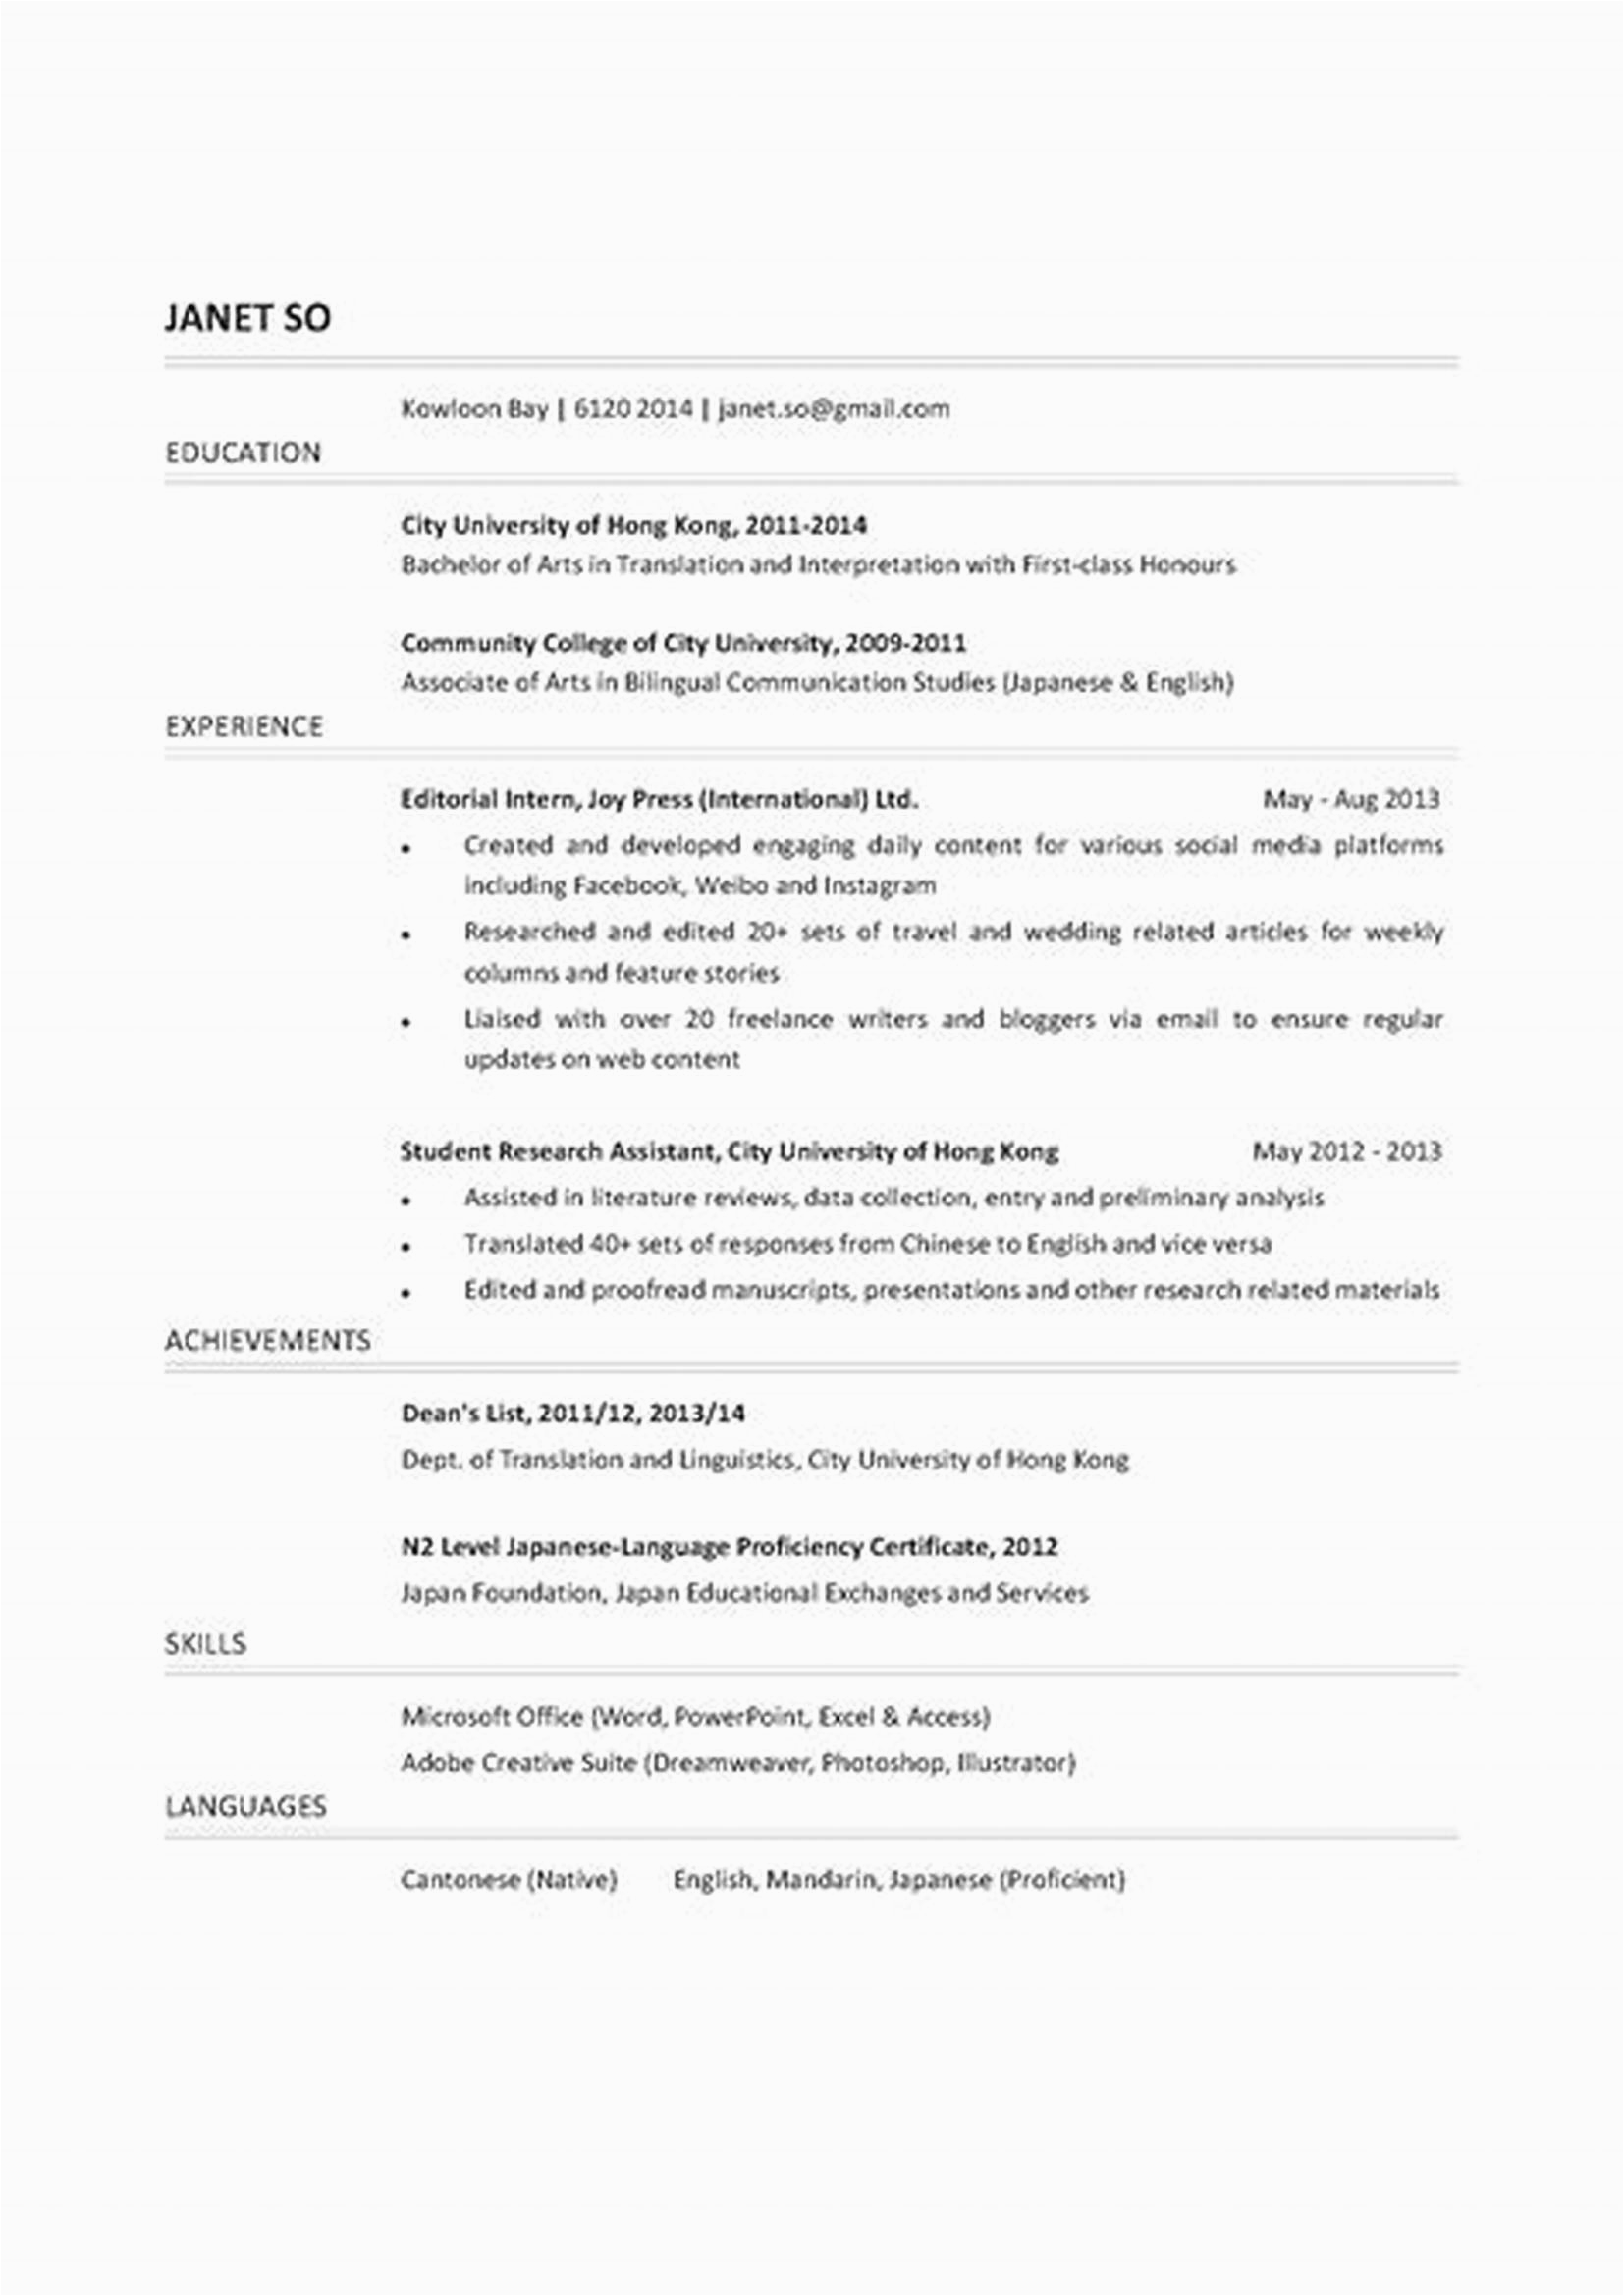 Thank You for Reviewing My Resume Samples Thank You for Reviewing My Resume – Salescvfo